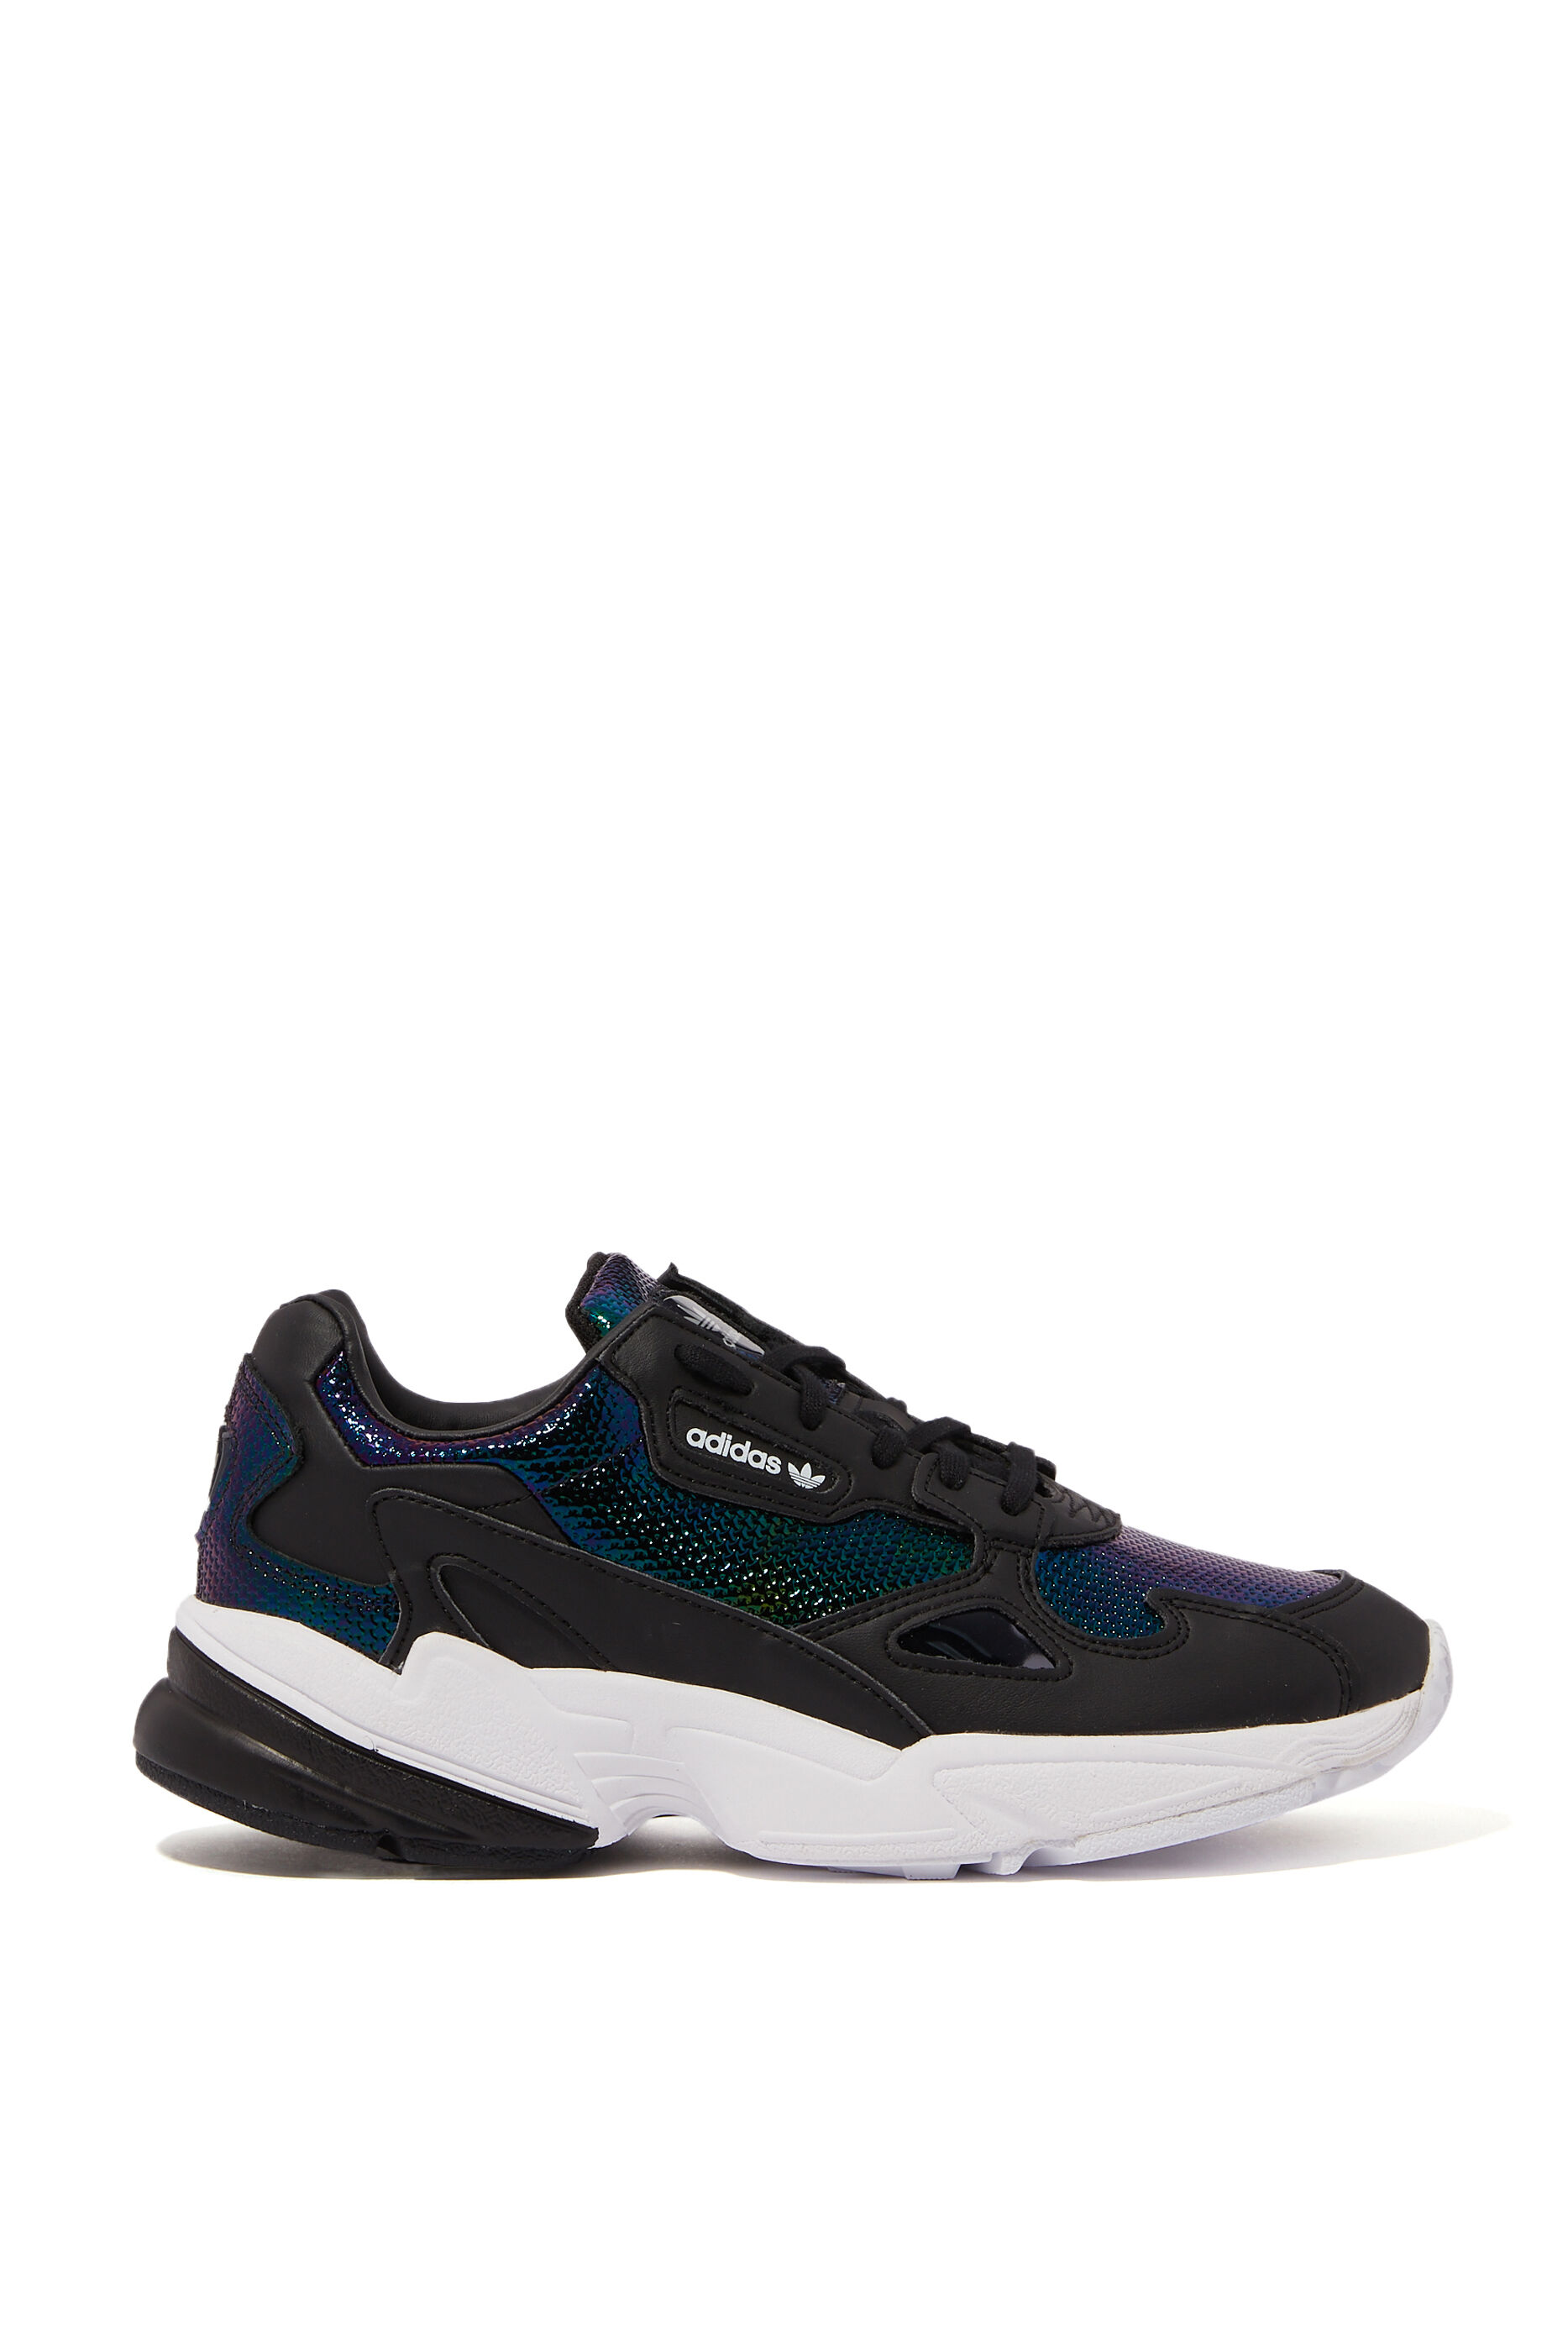 Buy Adidas Falcon Shoes - Womens for 